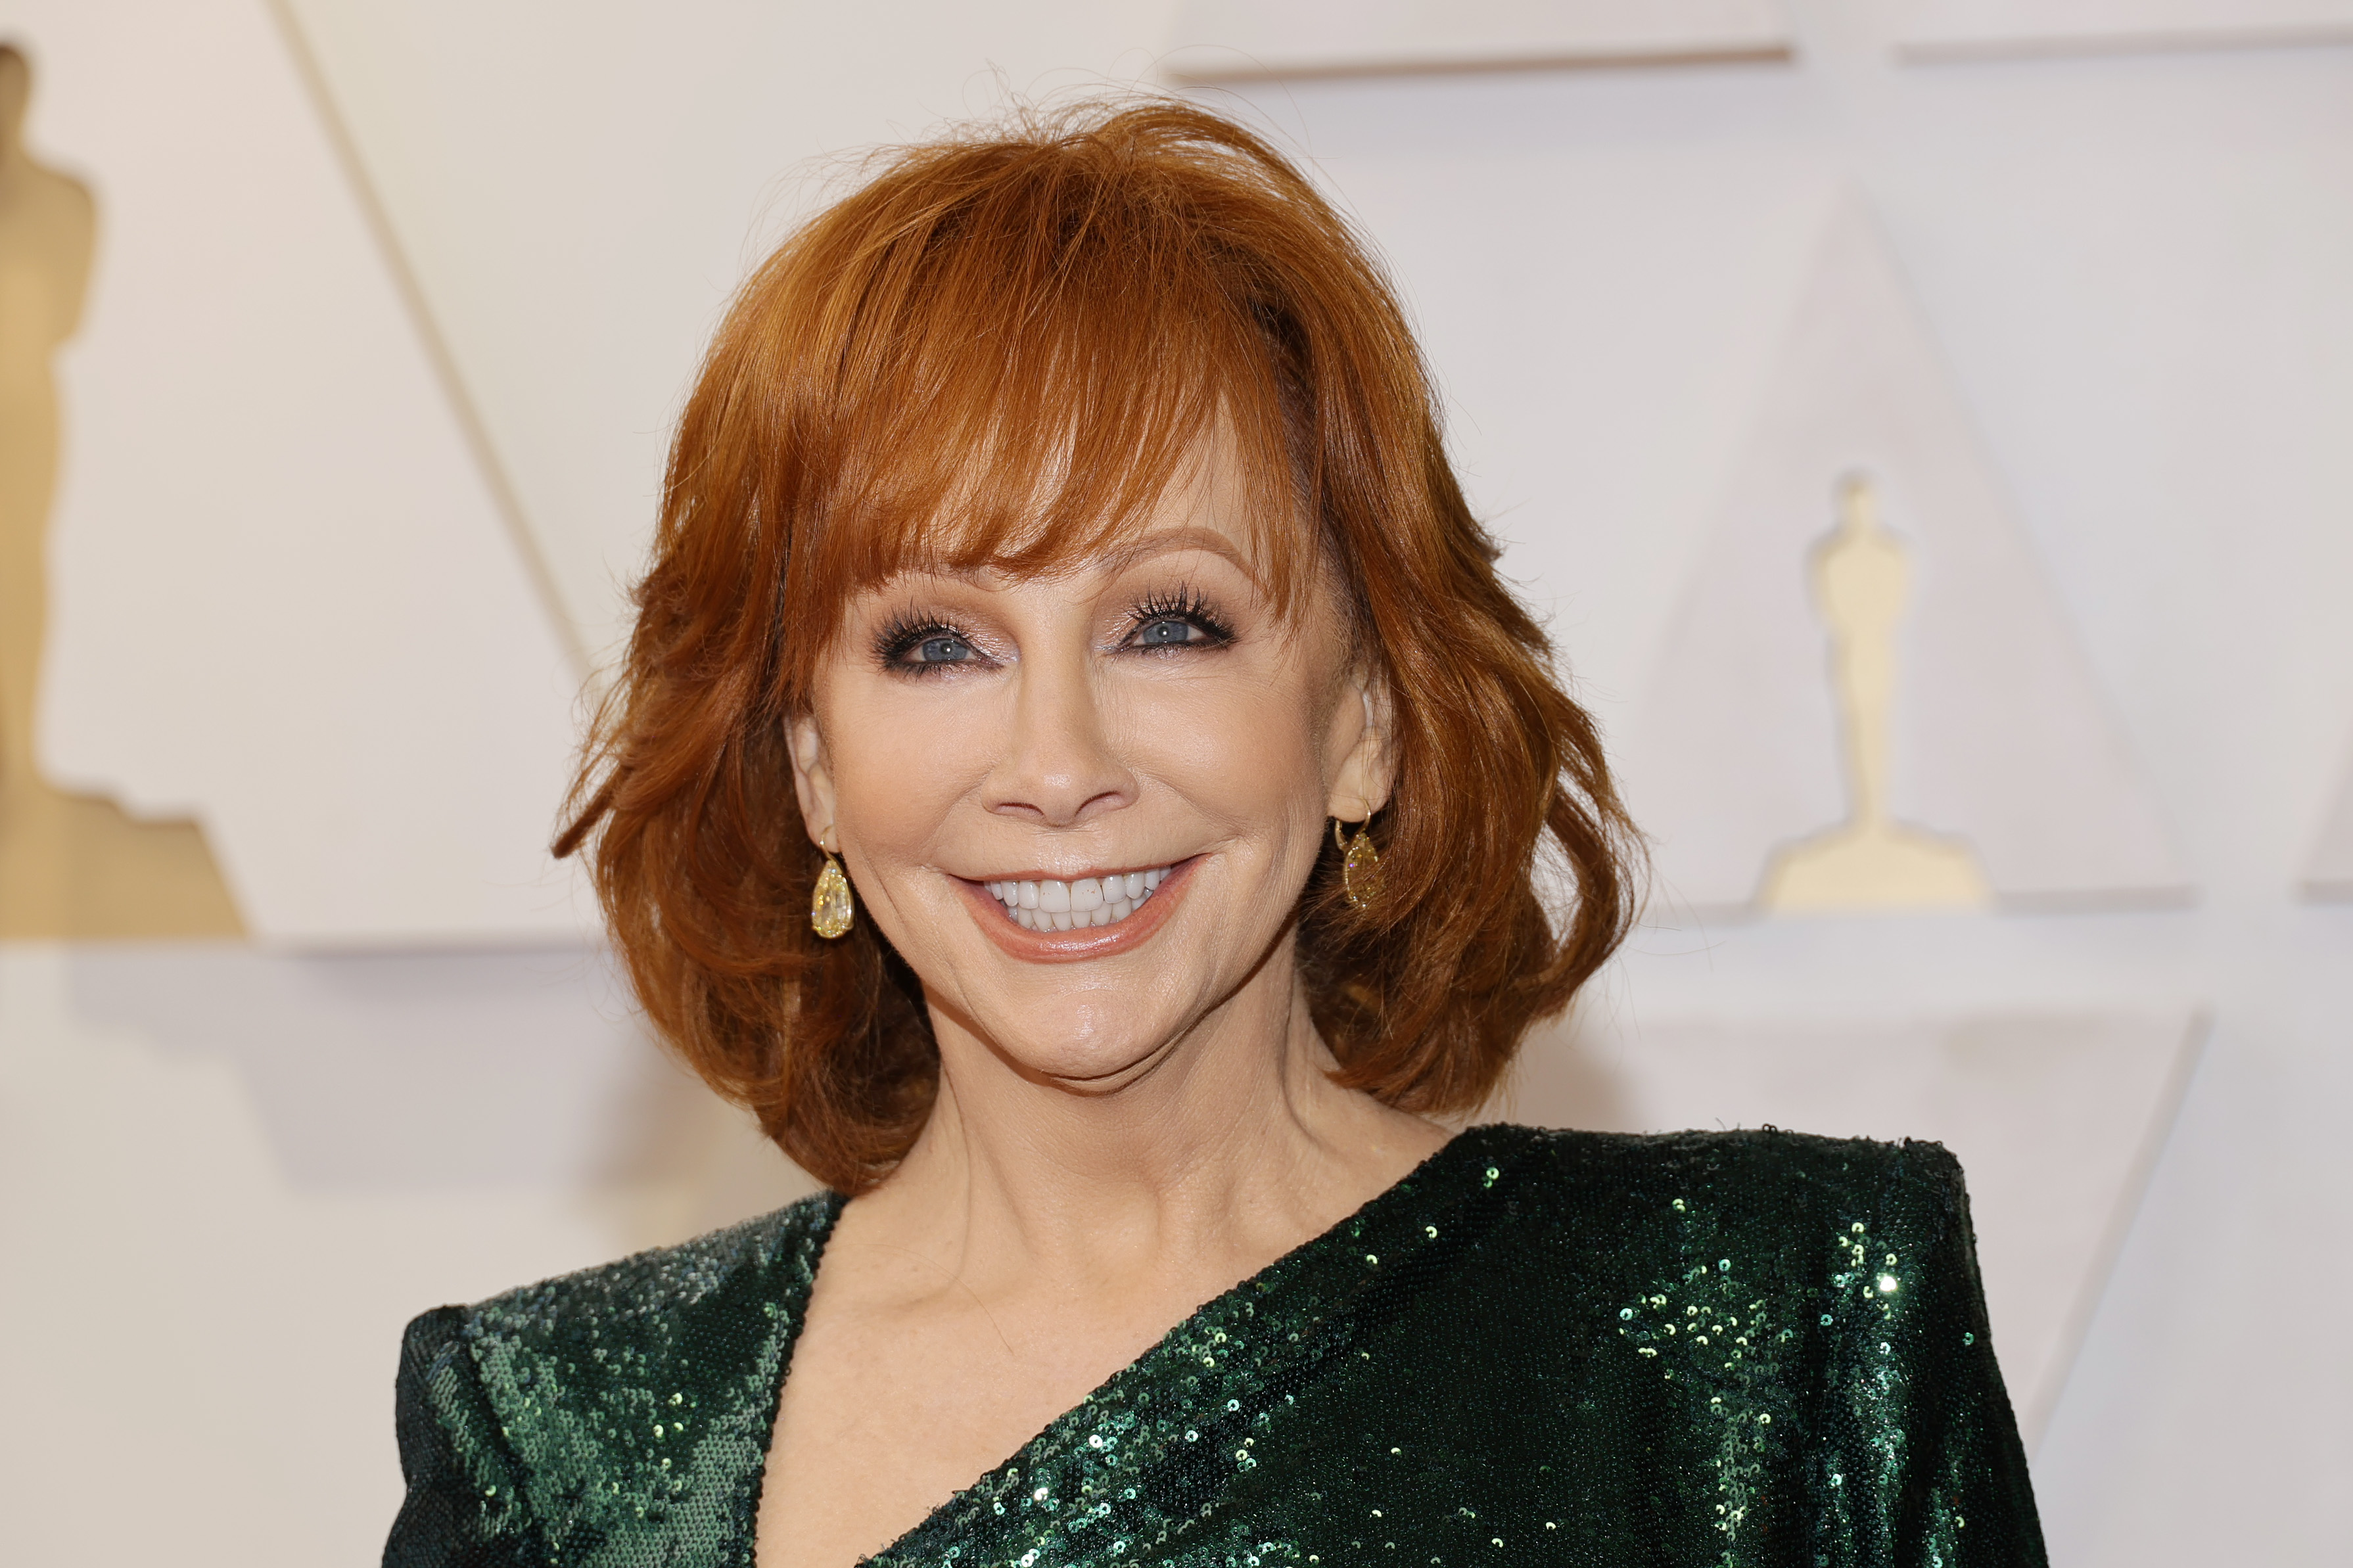 Reba McEntire at the 94th Annual Academy Awards on March 27, 2022, in Hollywood, California. | Source: Getty Images